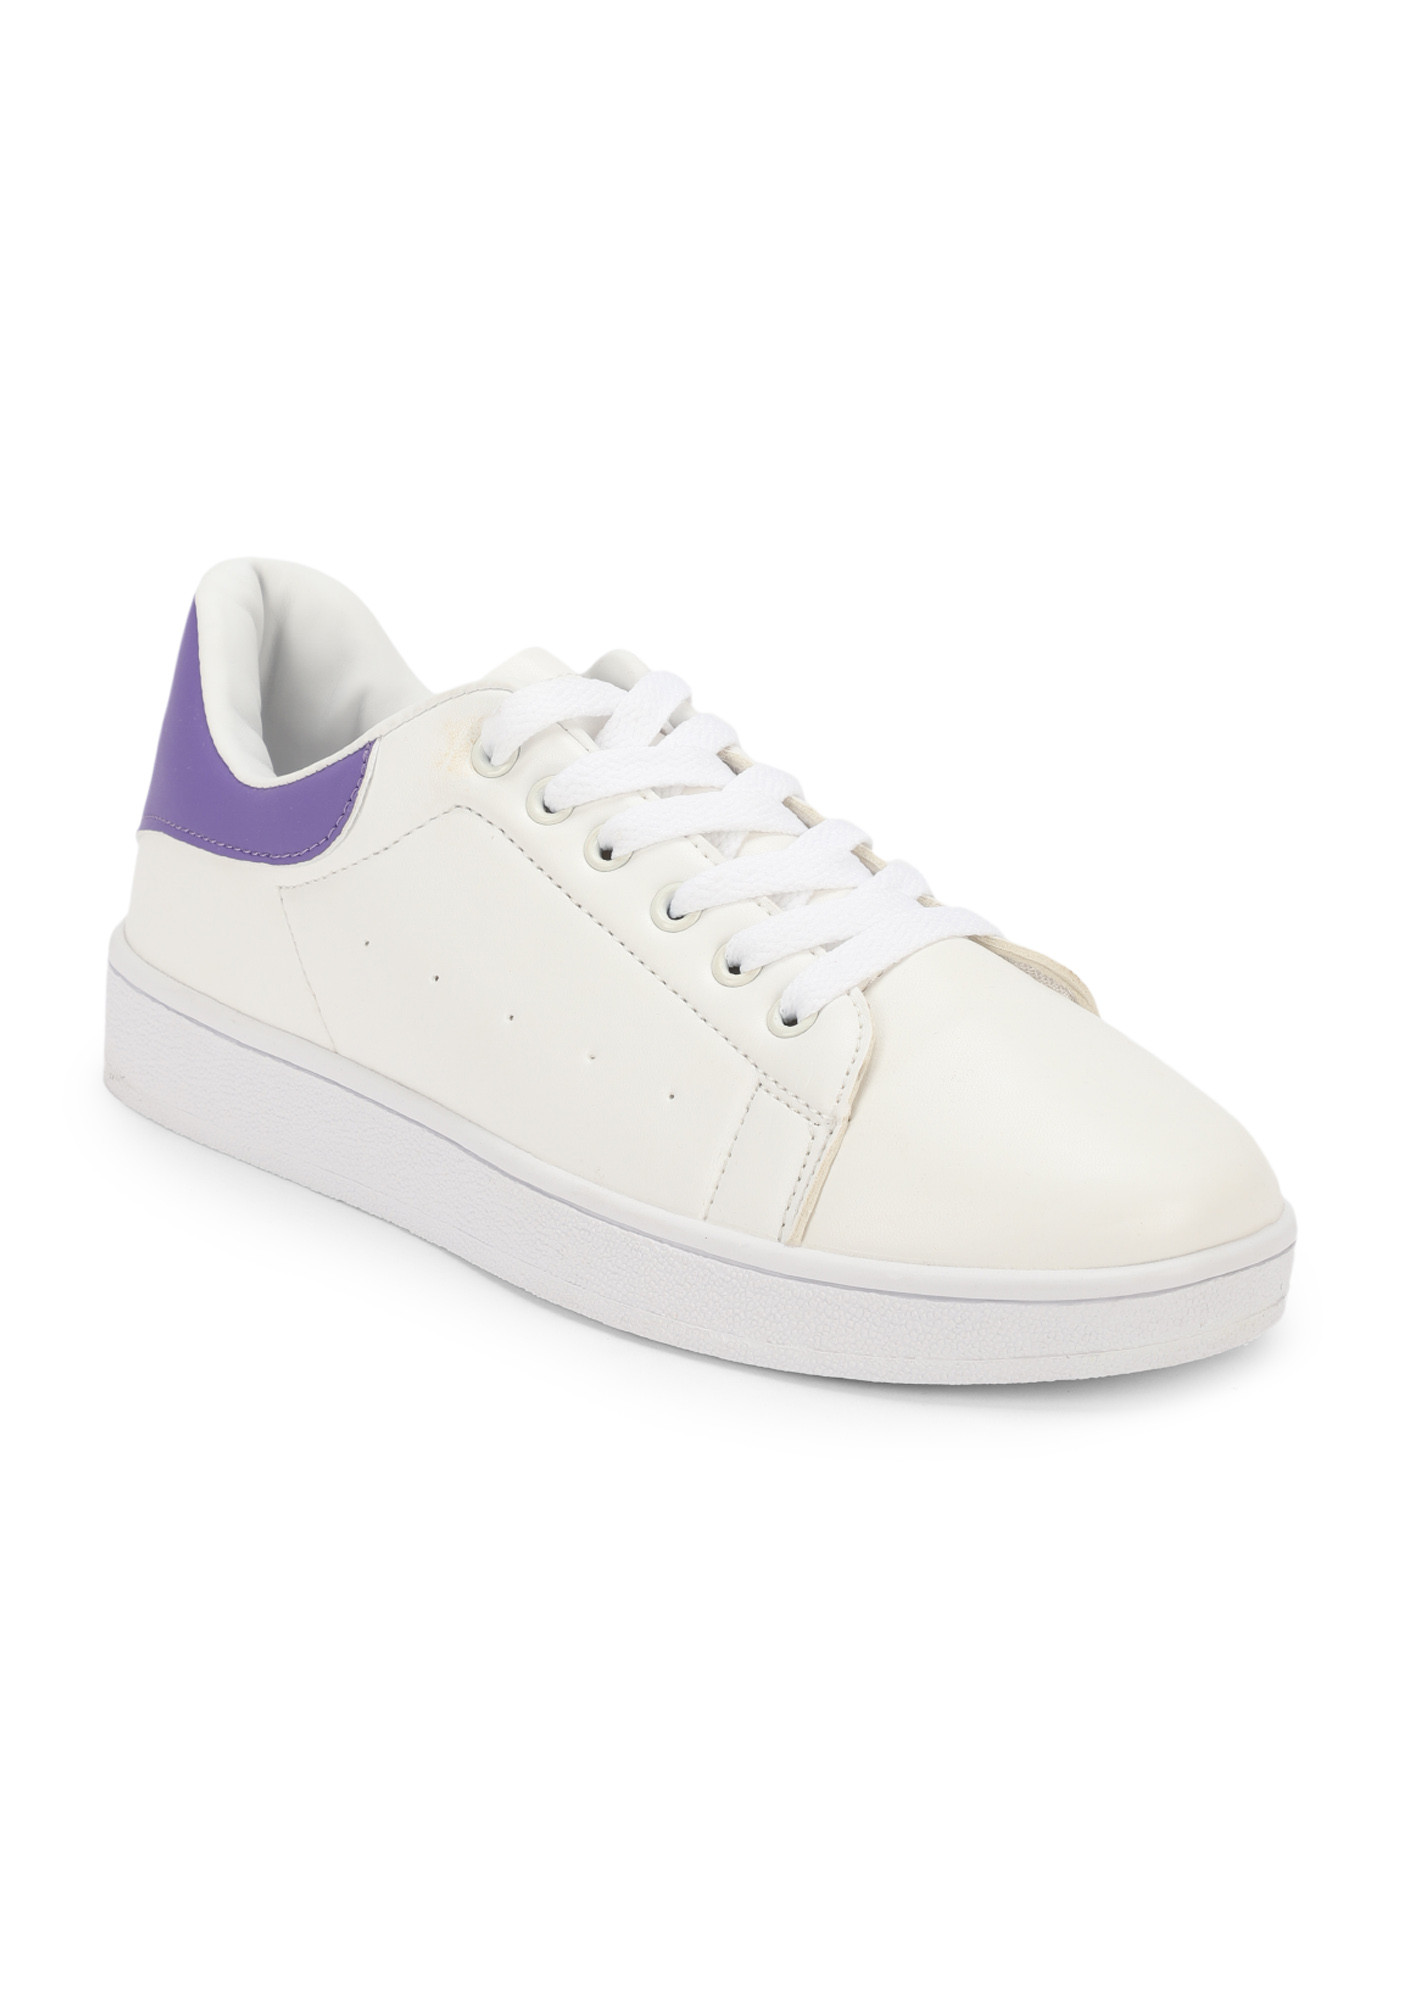 ADD SOME COLOR FOLKS PURPLE TRAINERS